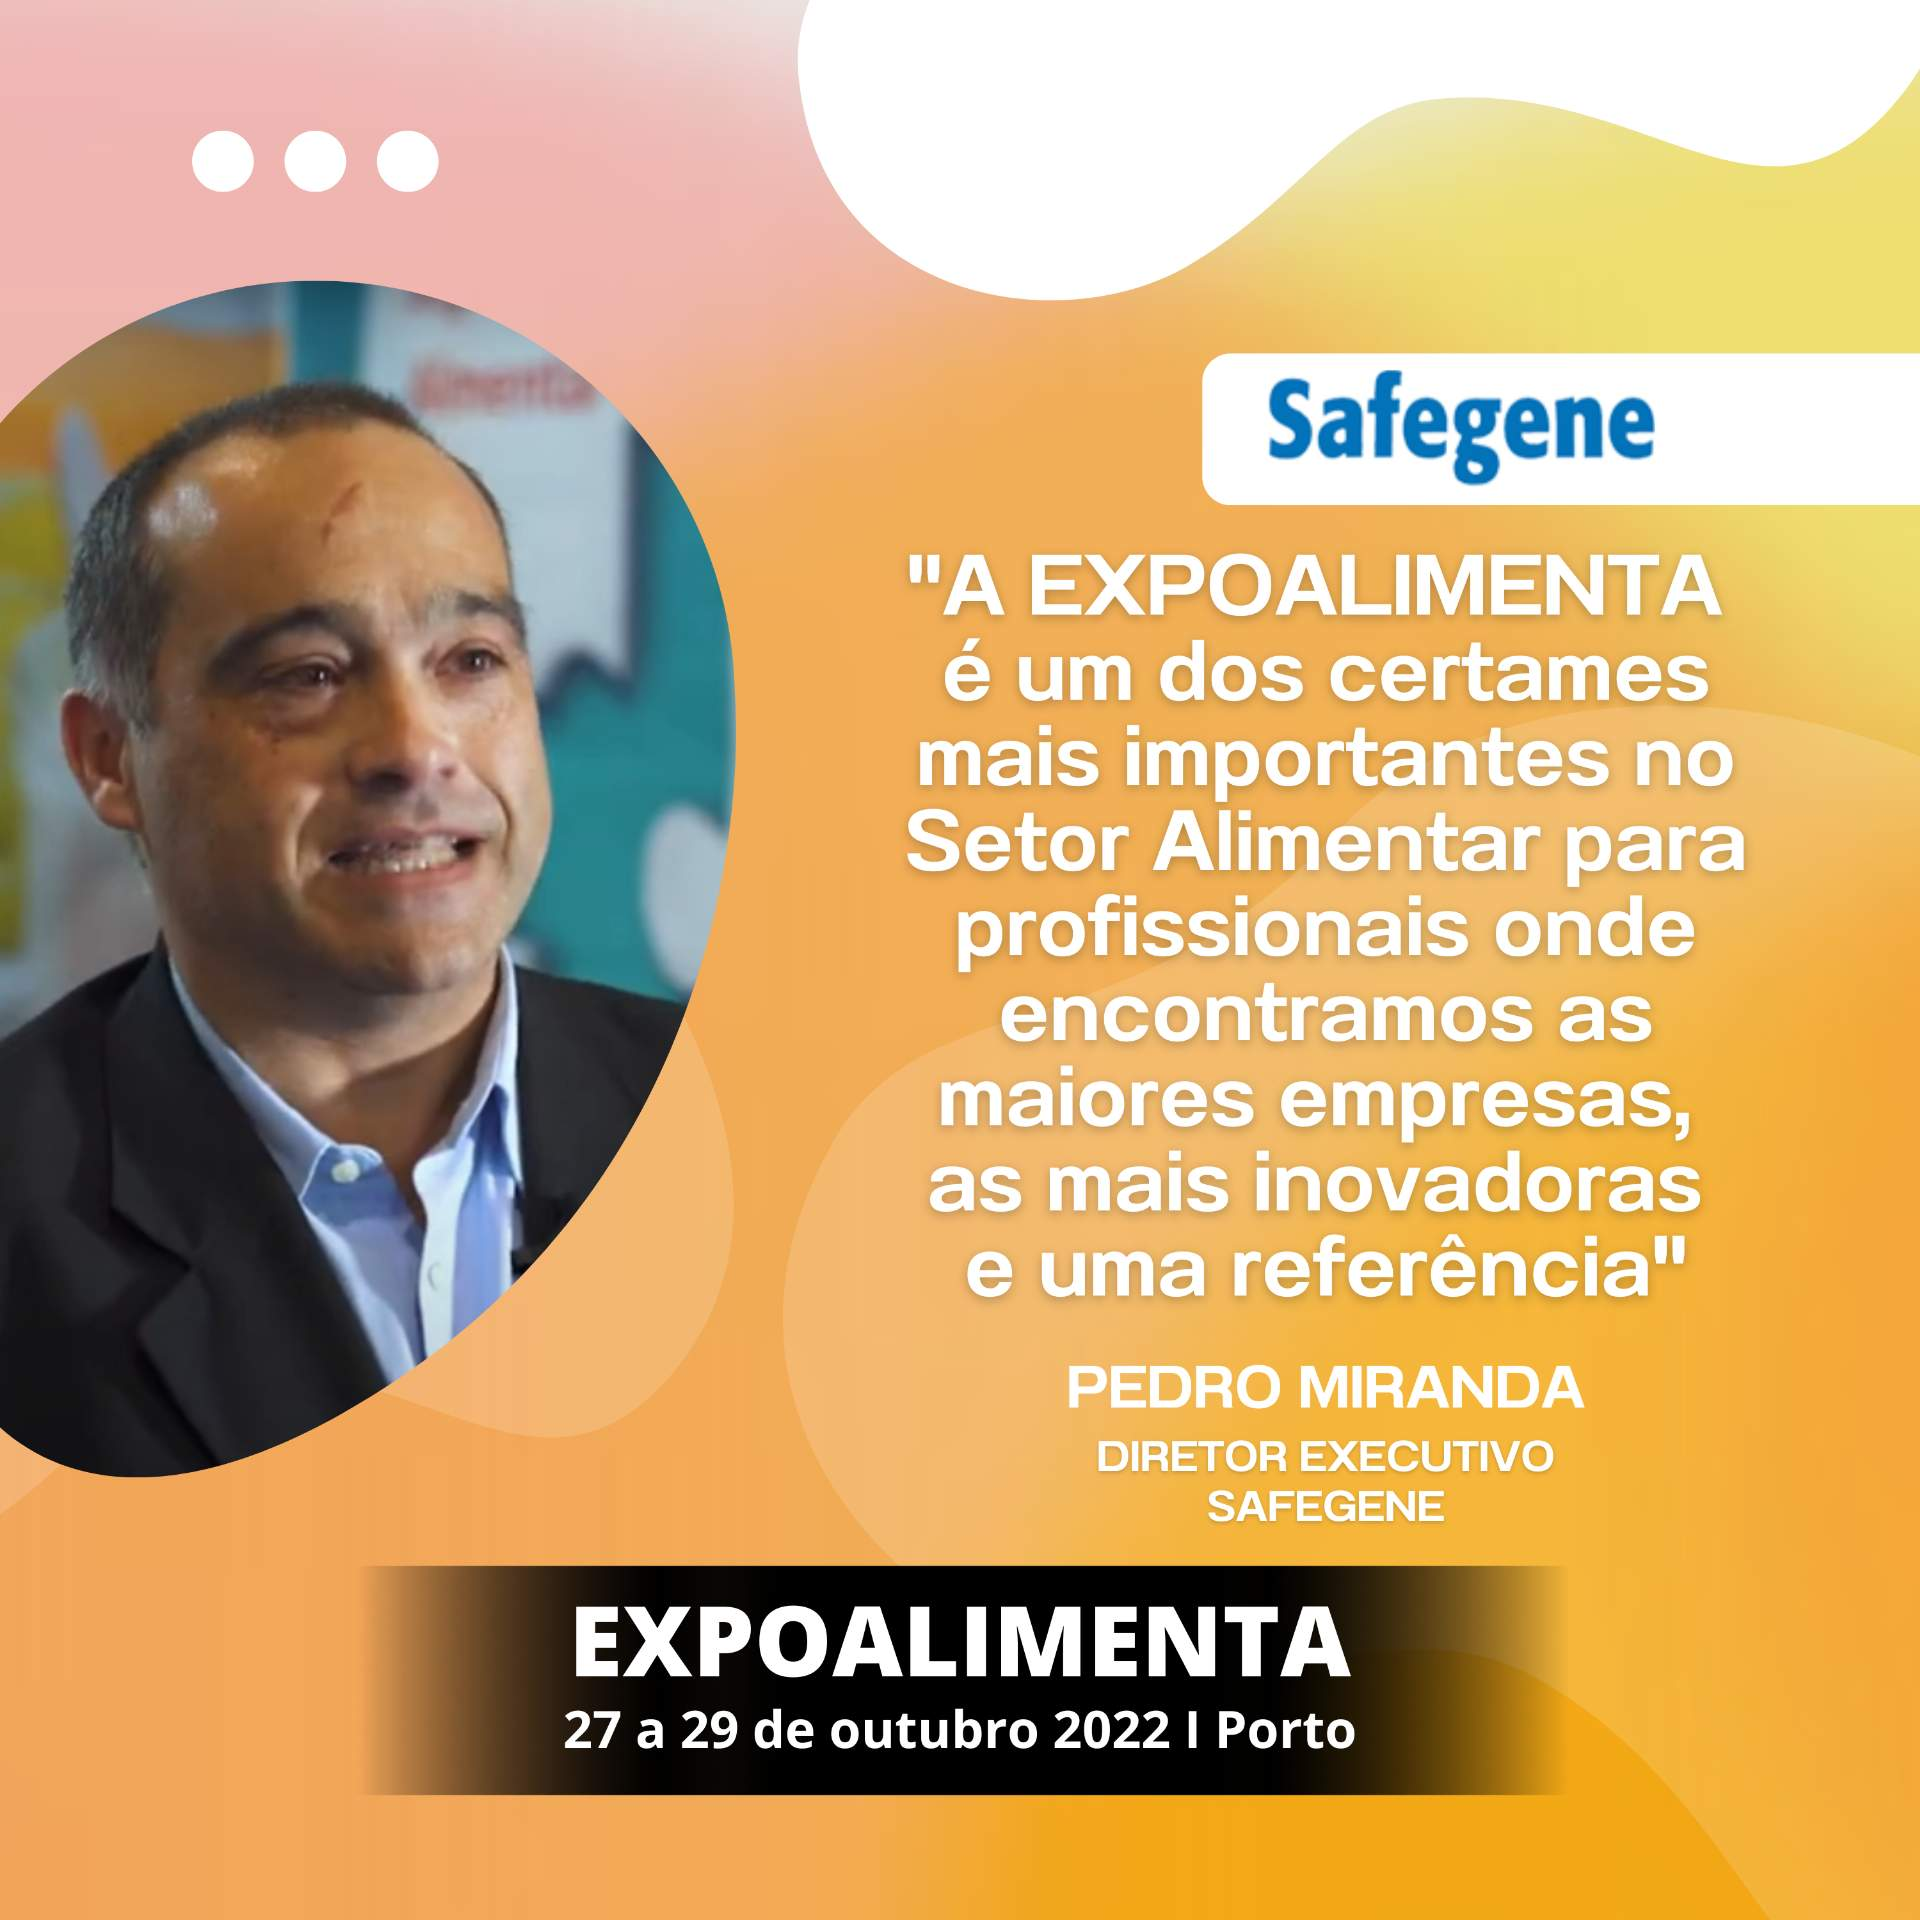 Safegene: "EXPOALIMENTA is one of the most important exhibitions in the Food Sector for professionals where we find the largest and most innovative companies and a reference".